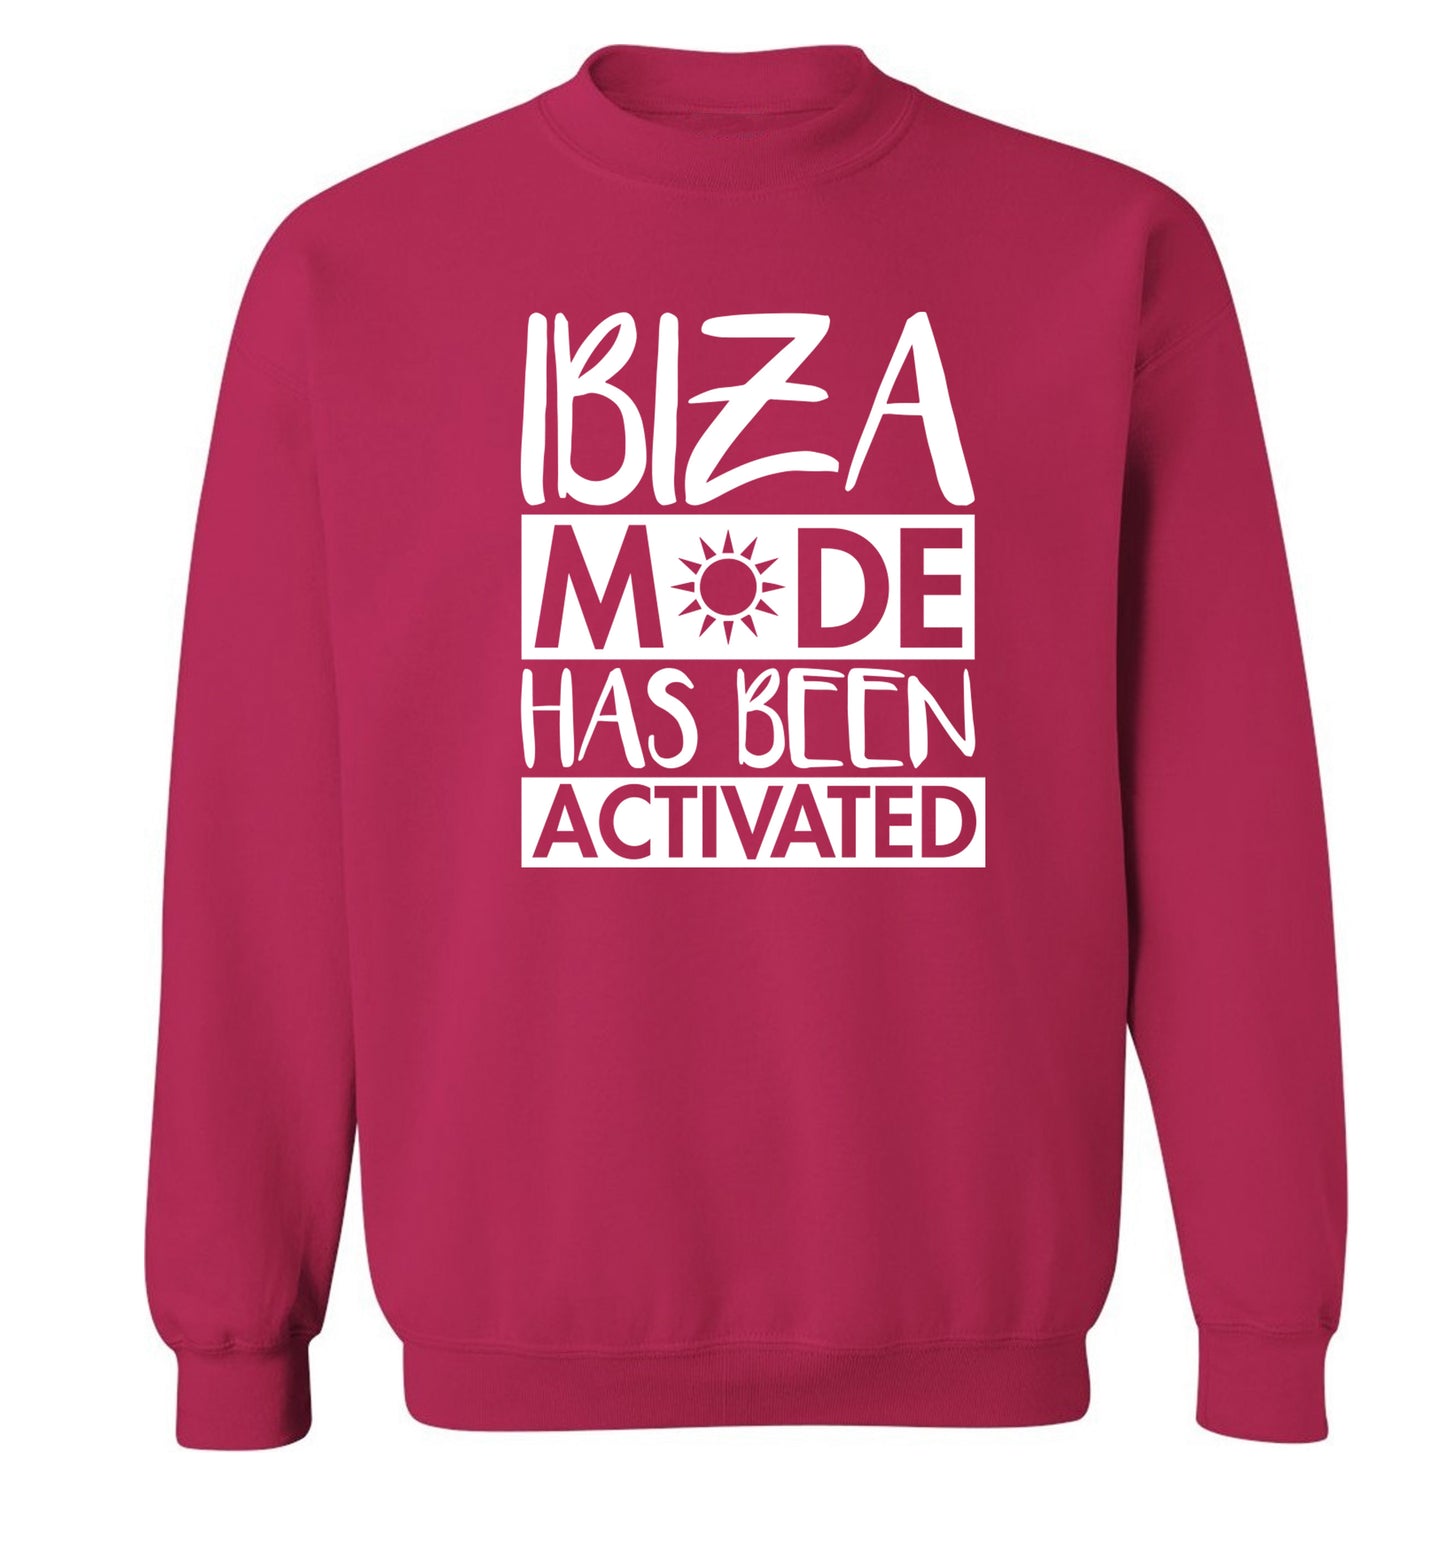 Ibiza mode has been activated Adult's unisex pink Sweater 2XL